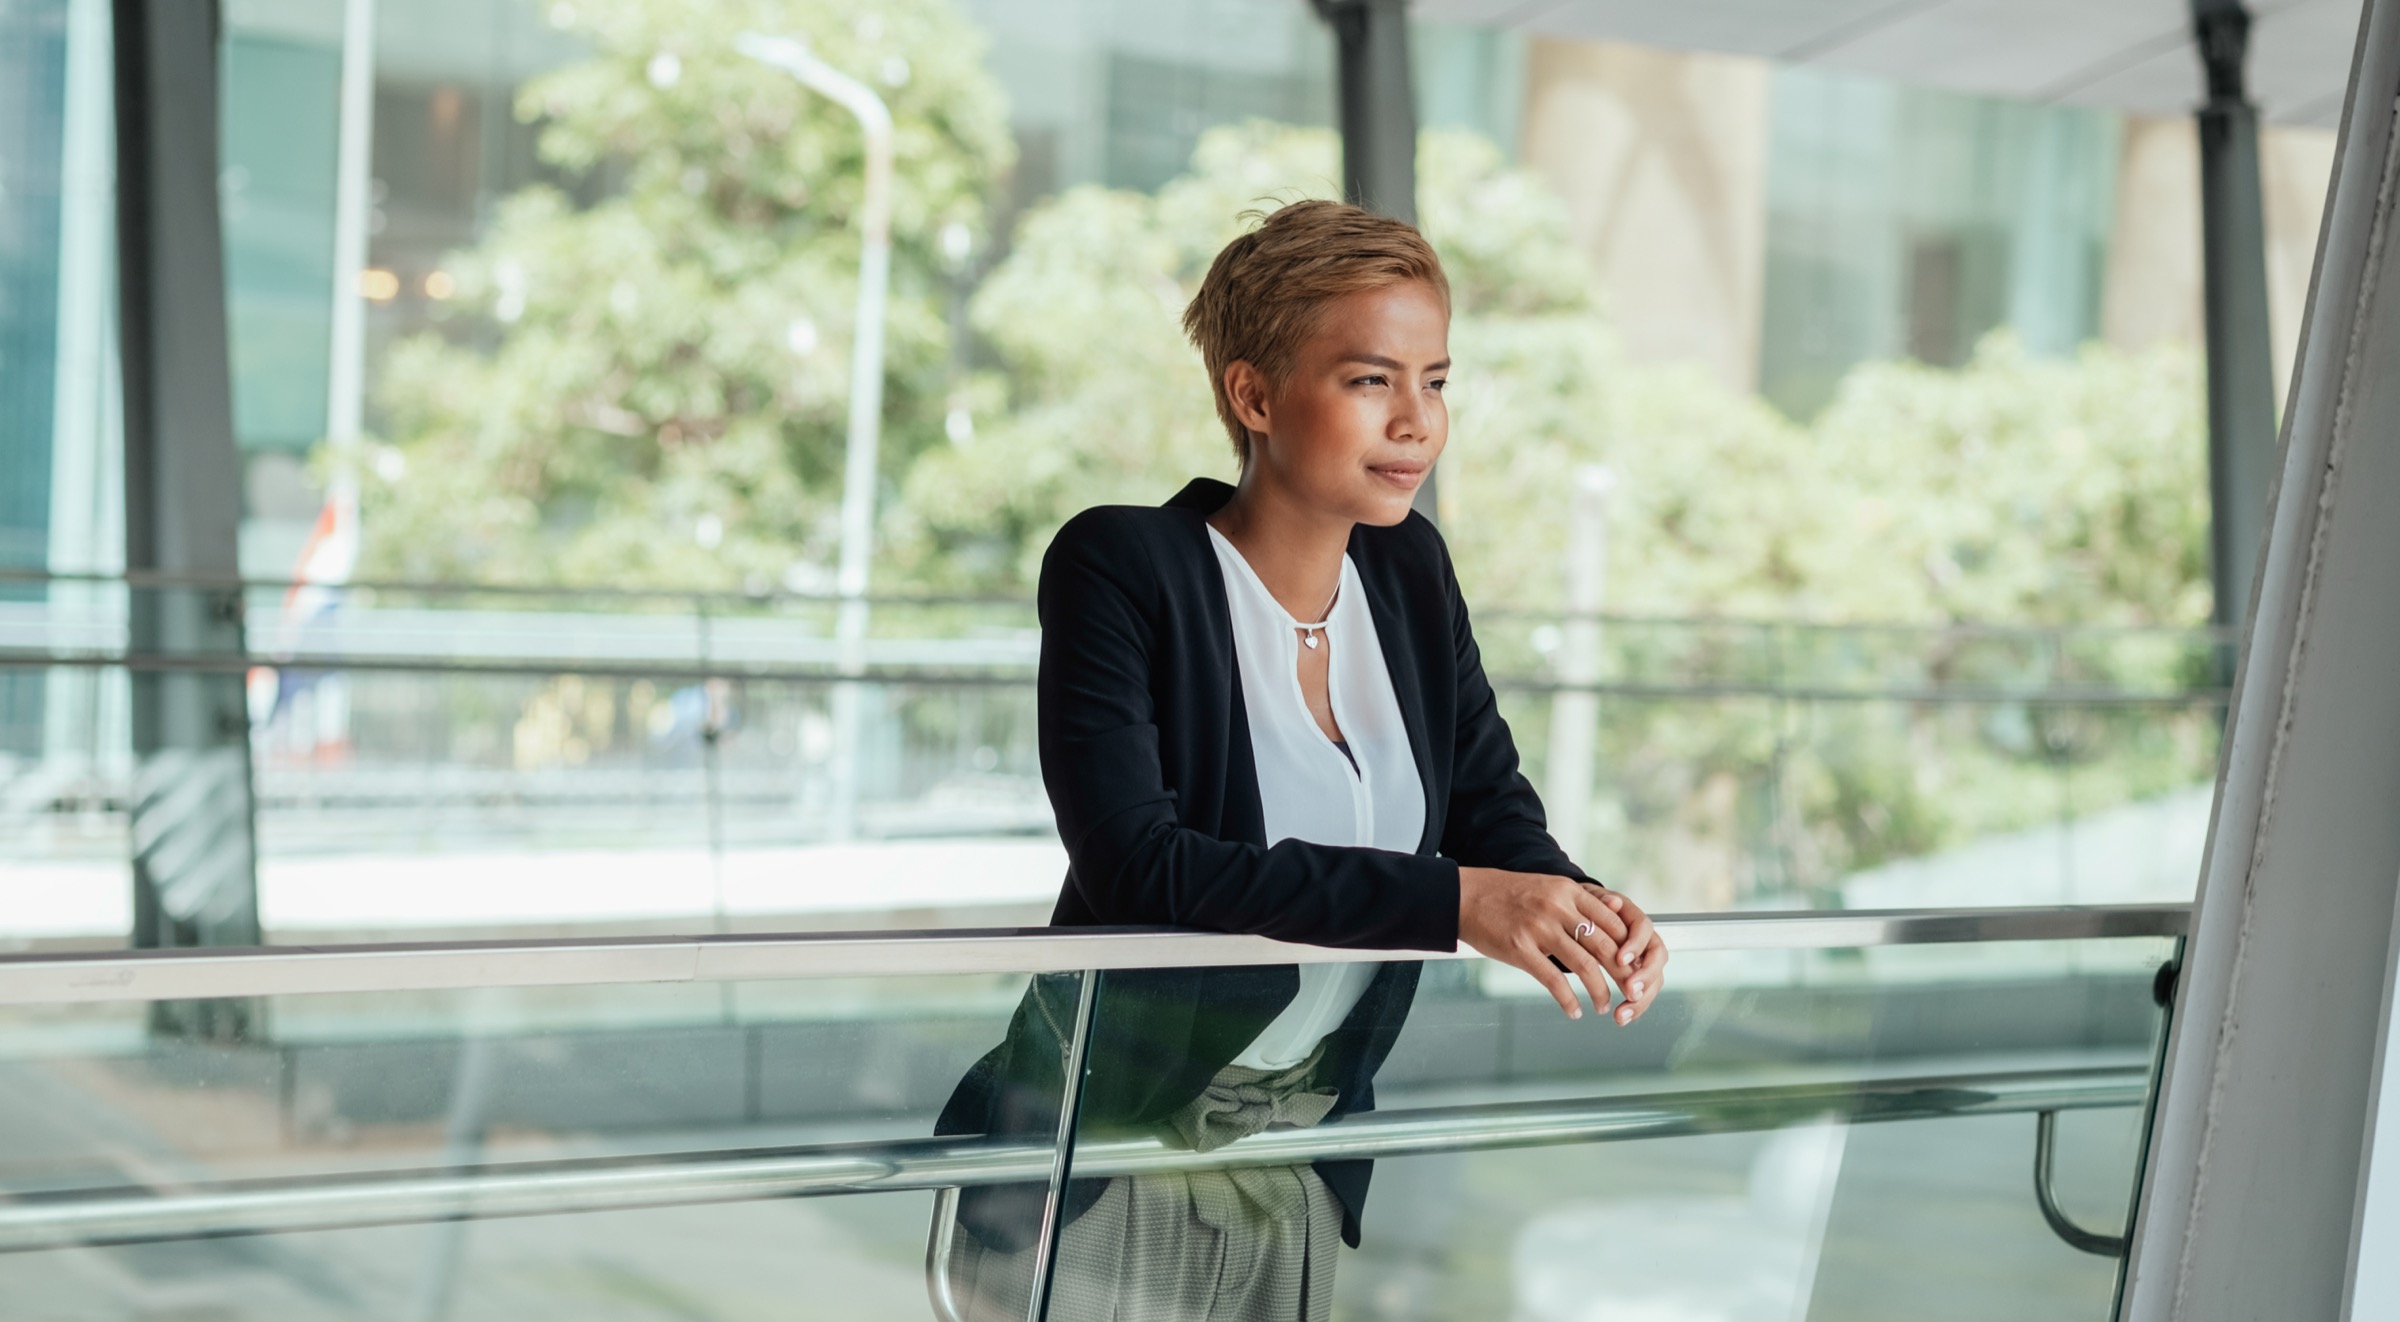 Successful businesswoman leaning on glass railing on a modern office balcony